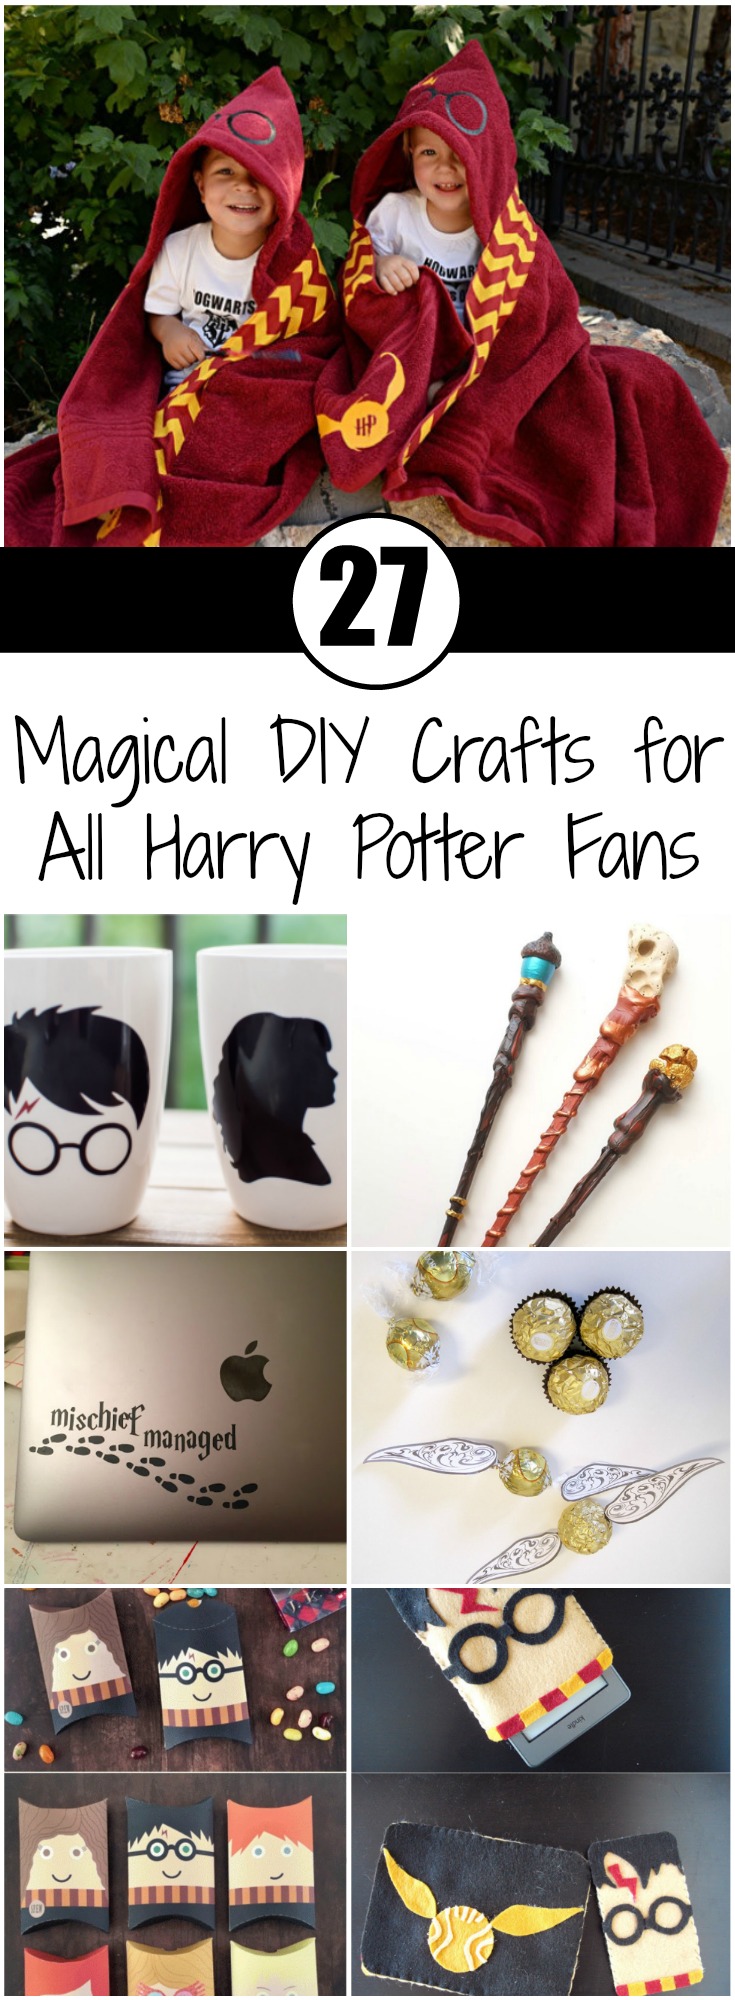 27 Magical DIY Crafts for All Harry Potter Fans - Ritely